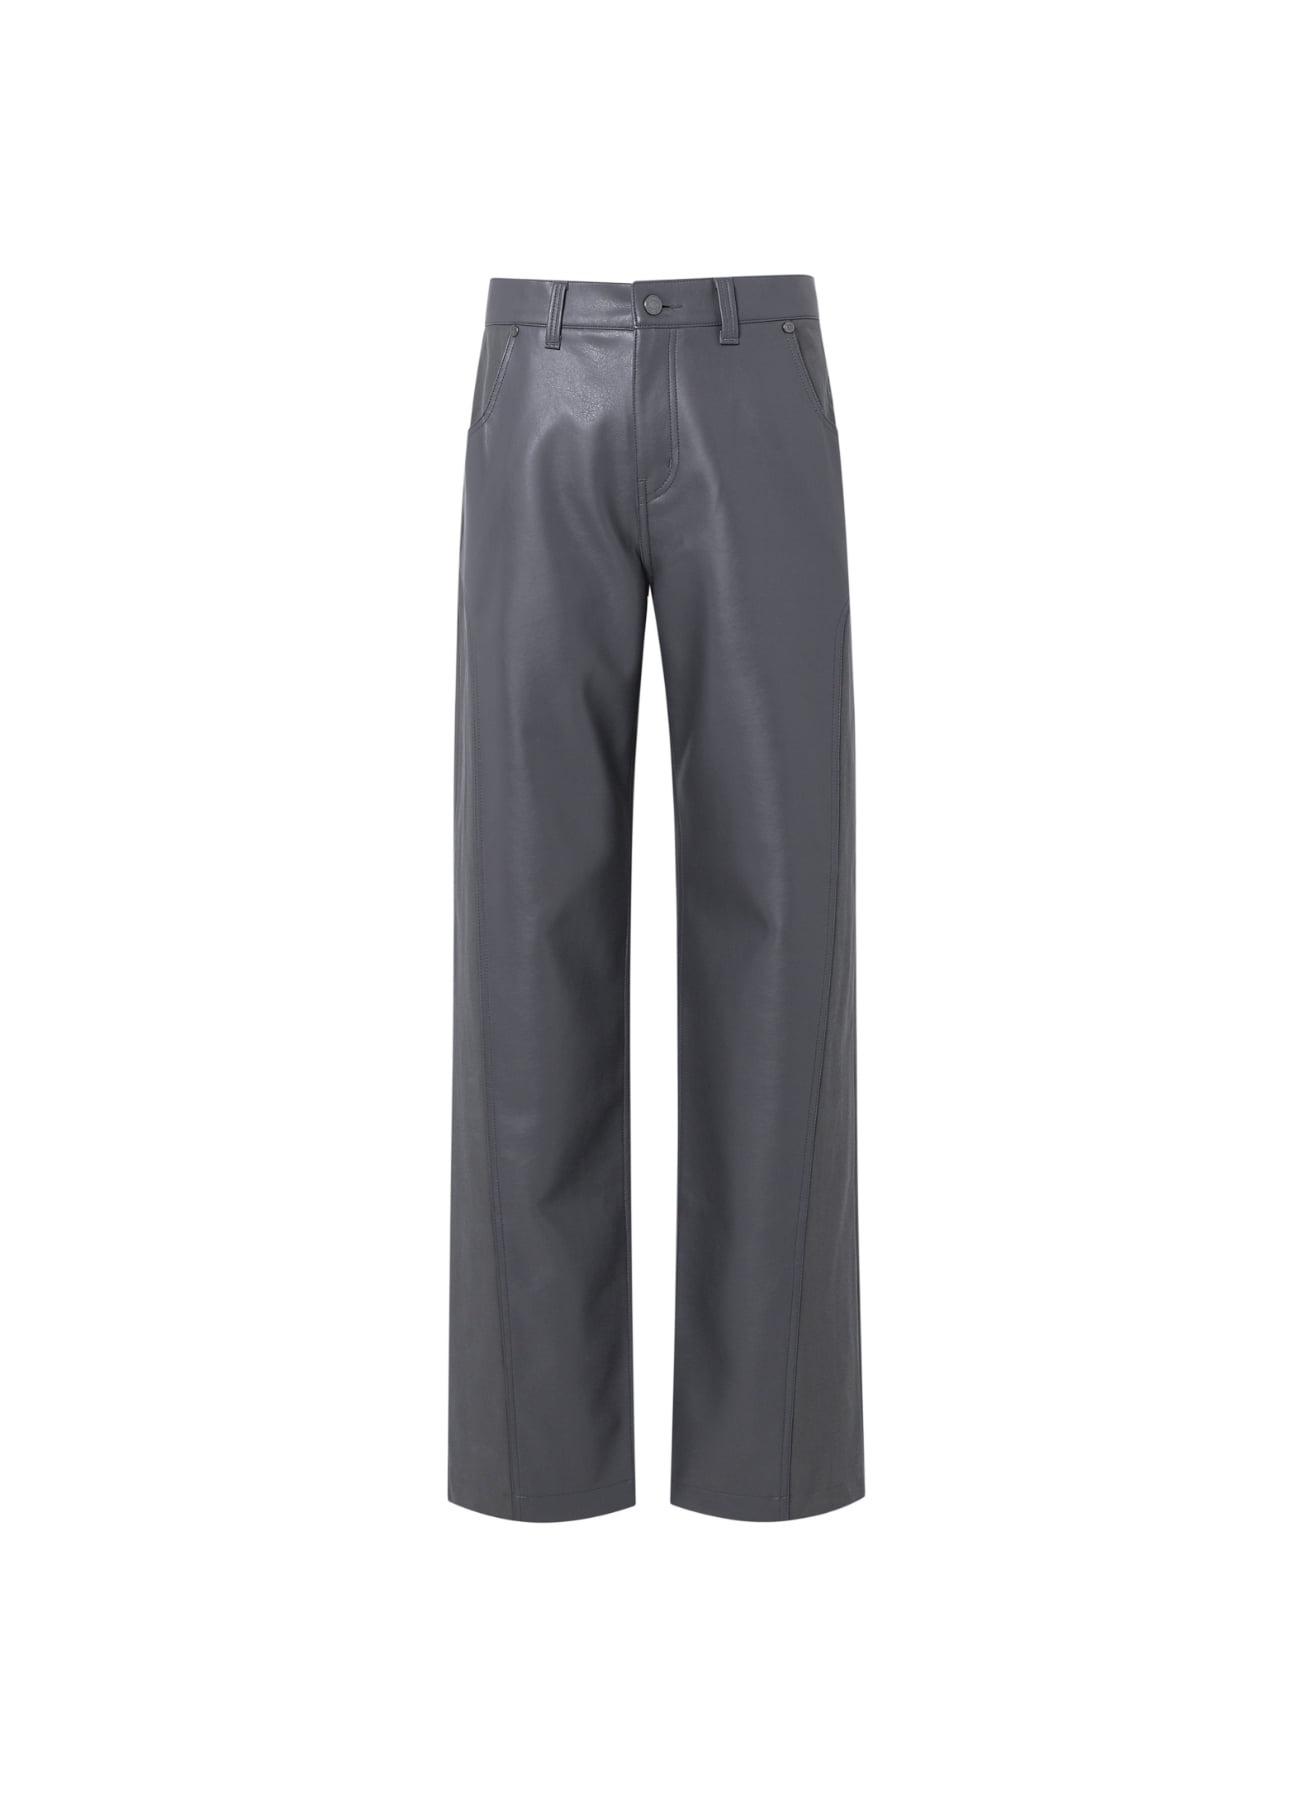 FRONT LEATHER MIX PANTS CHARCOAL